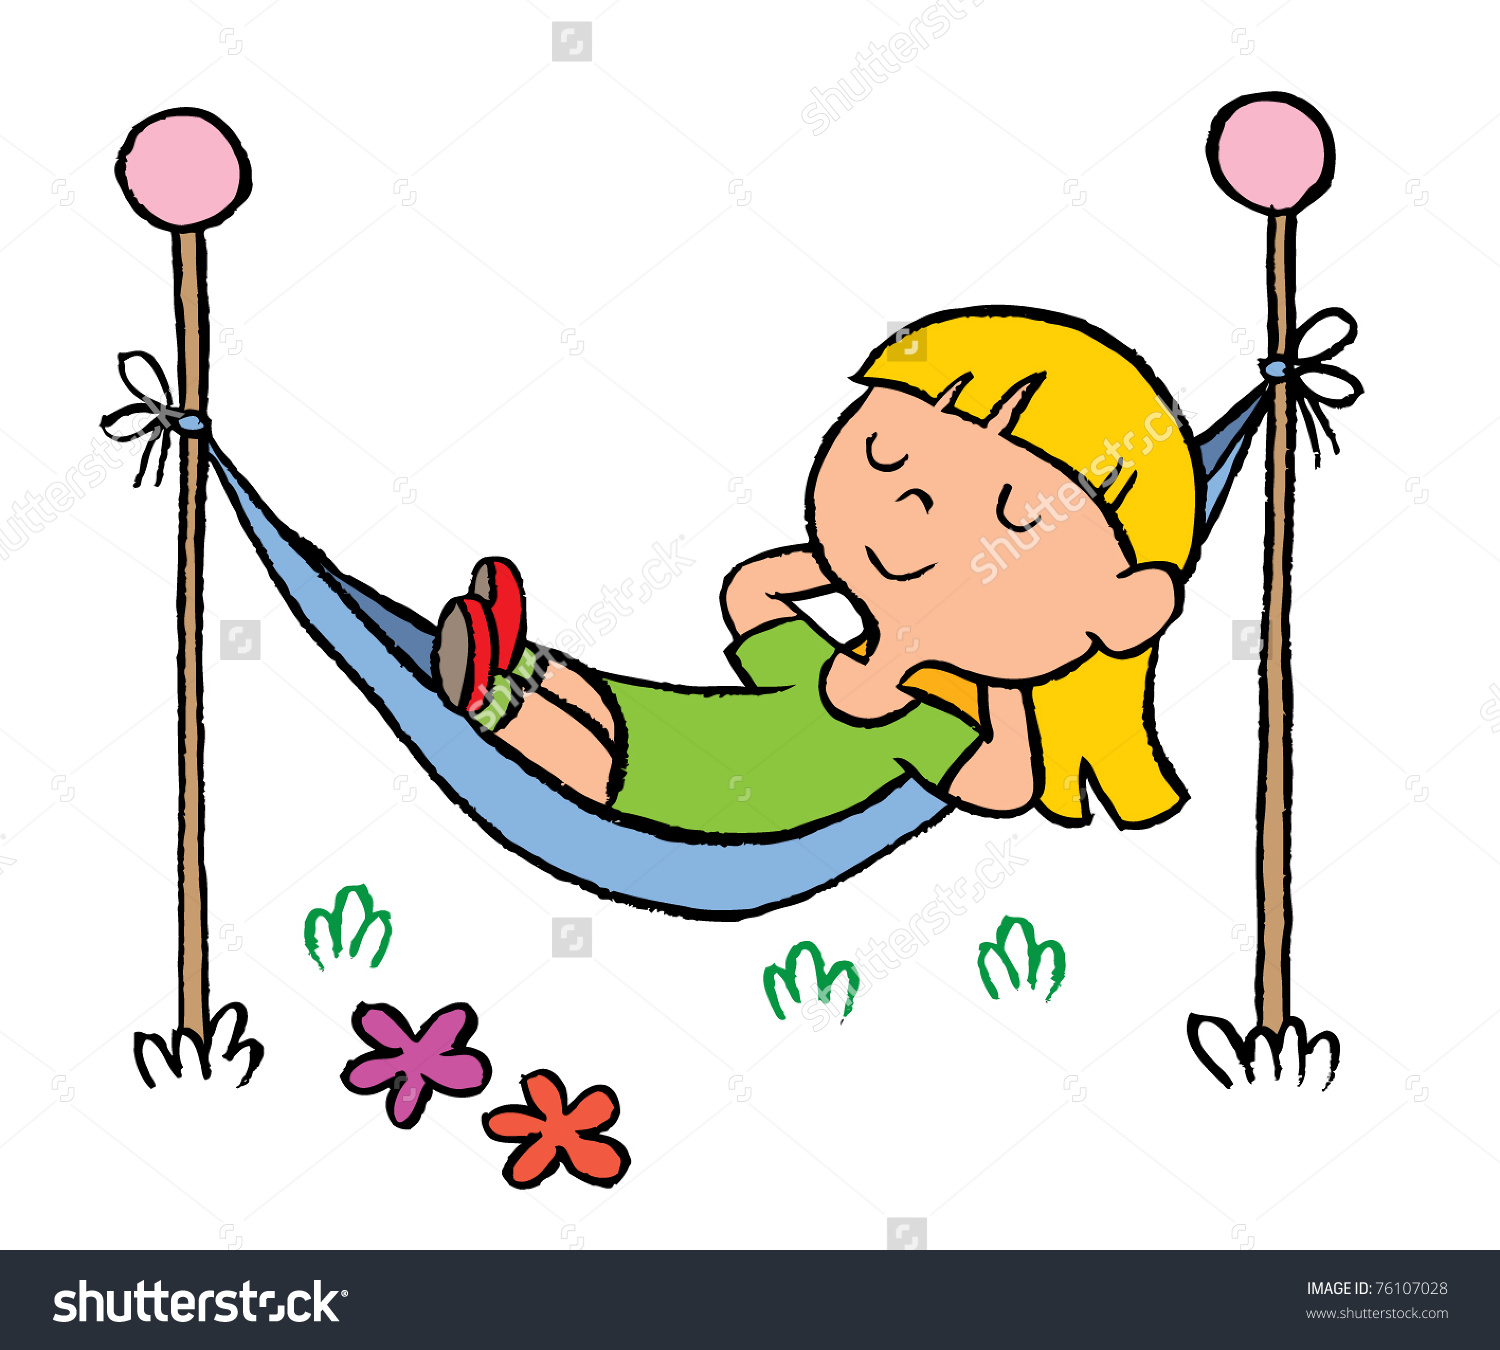 Calm clipart animated.  collection of kid